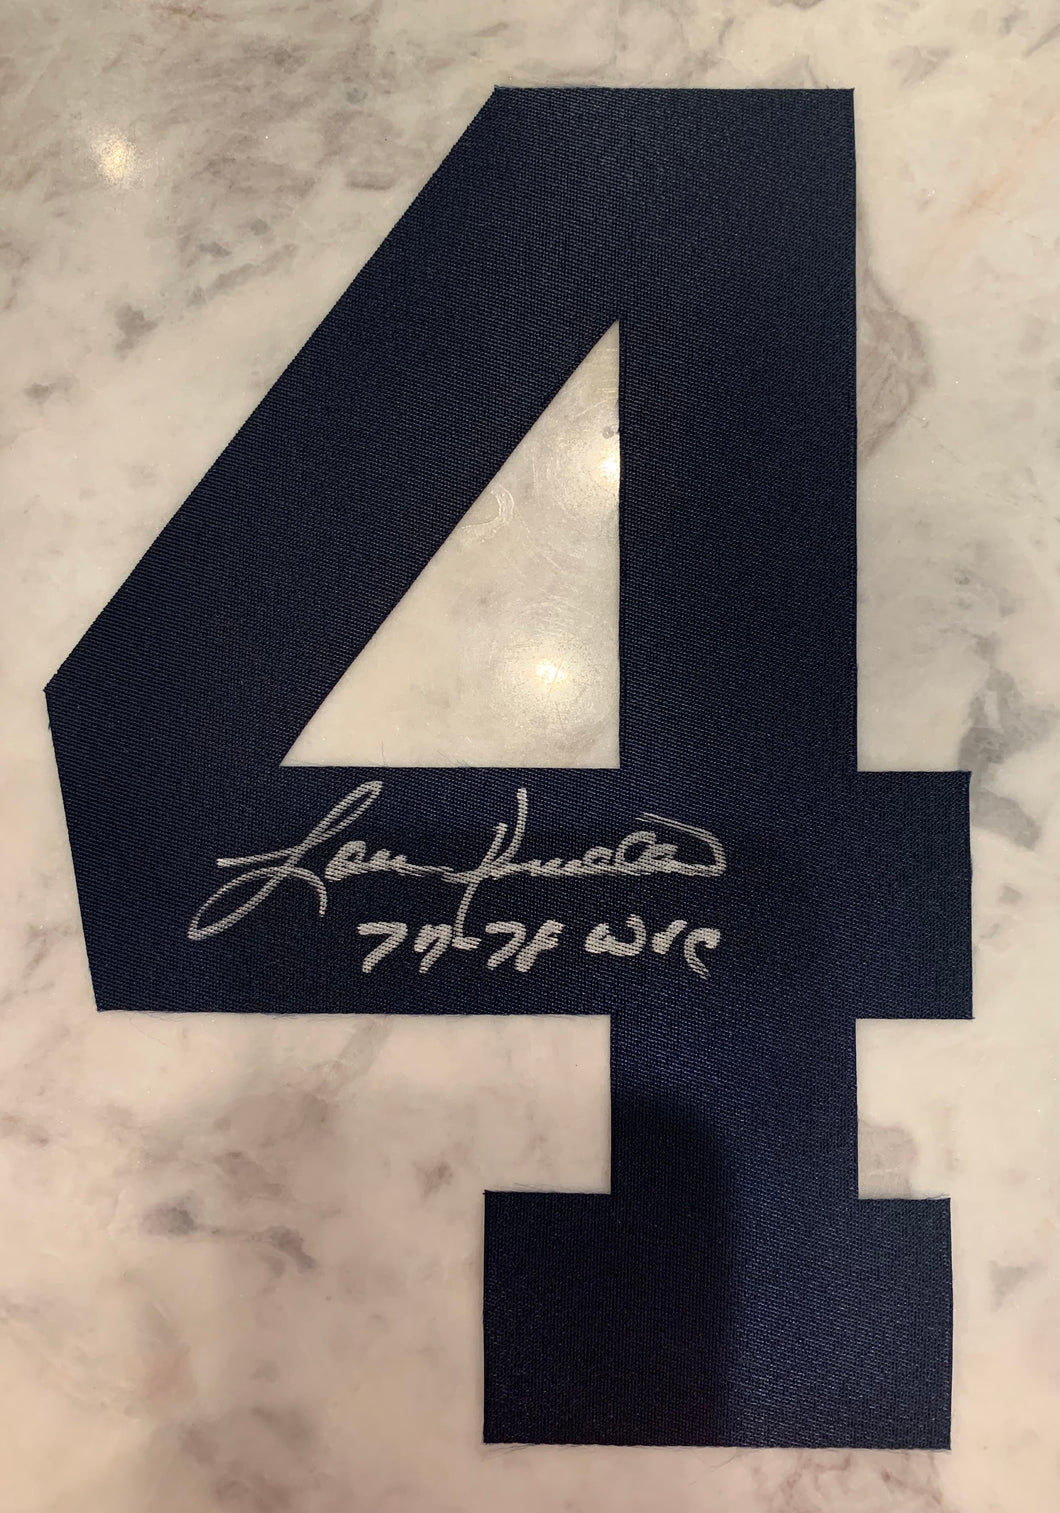 Lou Piniella Signed Yankees Jersey Number